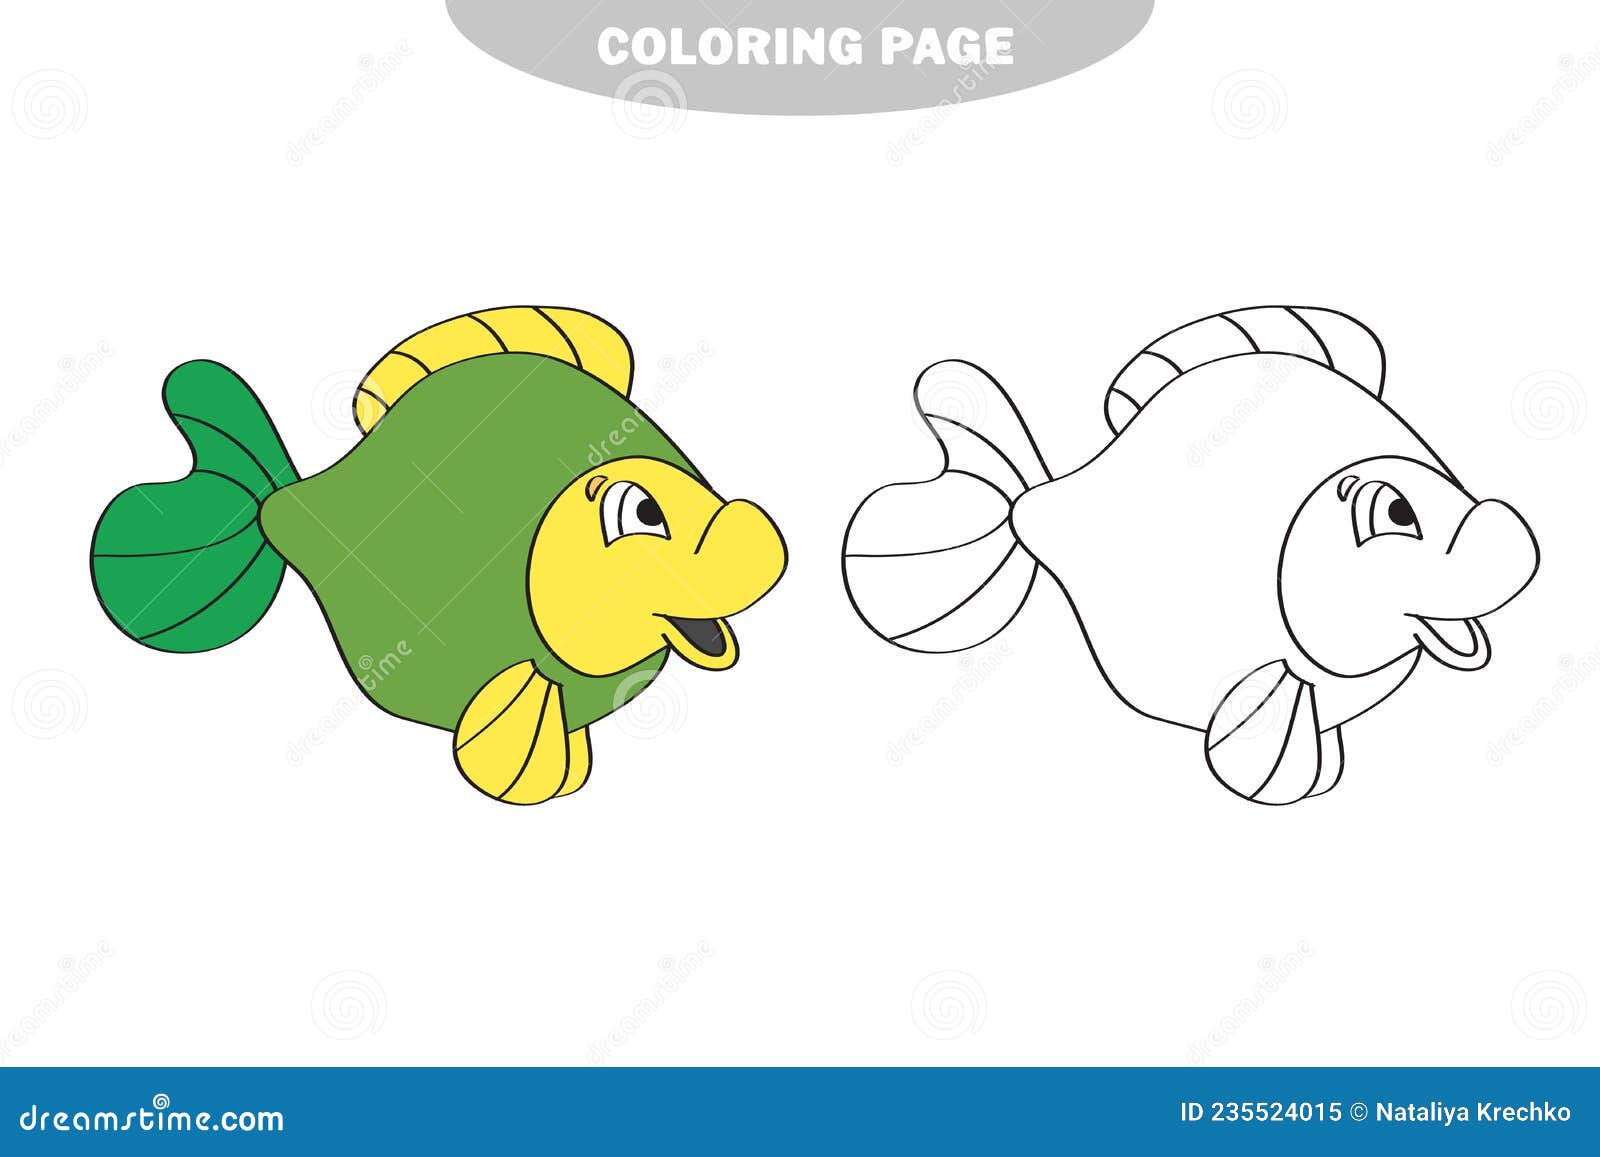 1,510,496 Fish Colouring Images, Stock Photos & Vectors | Shutterstock